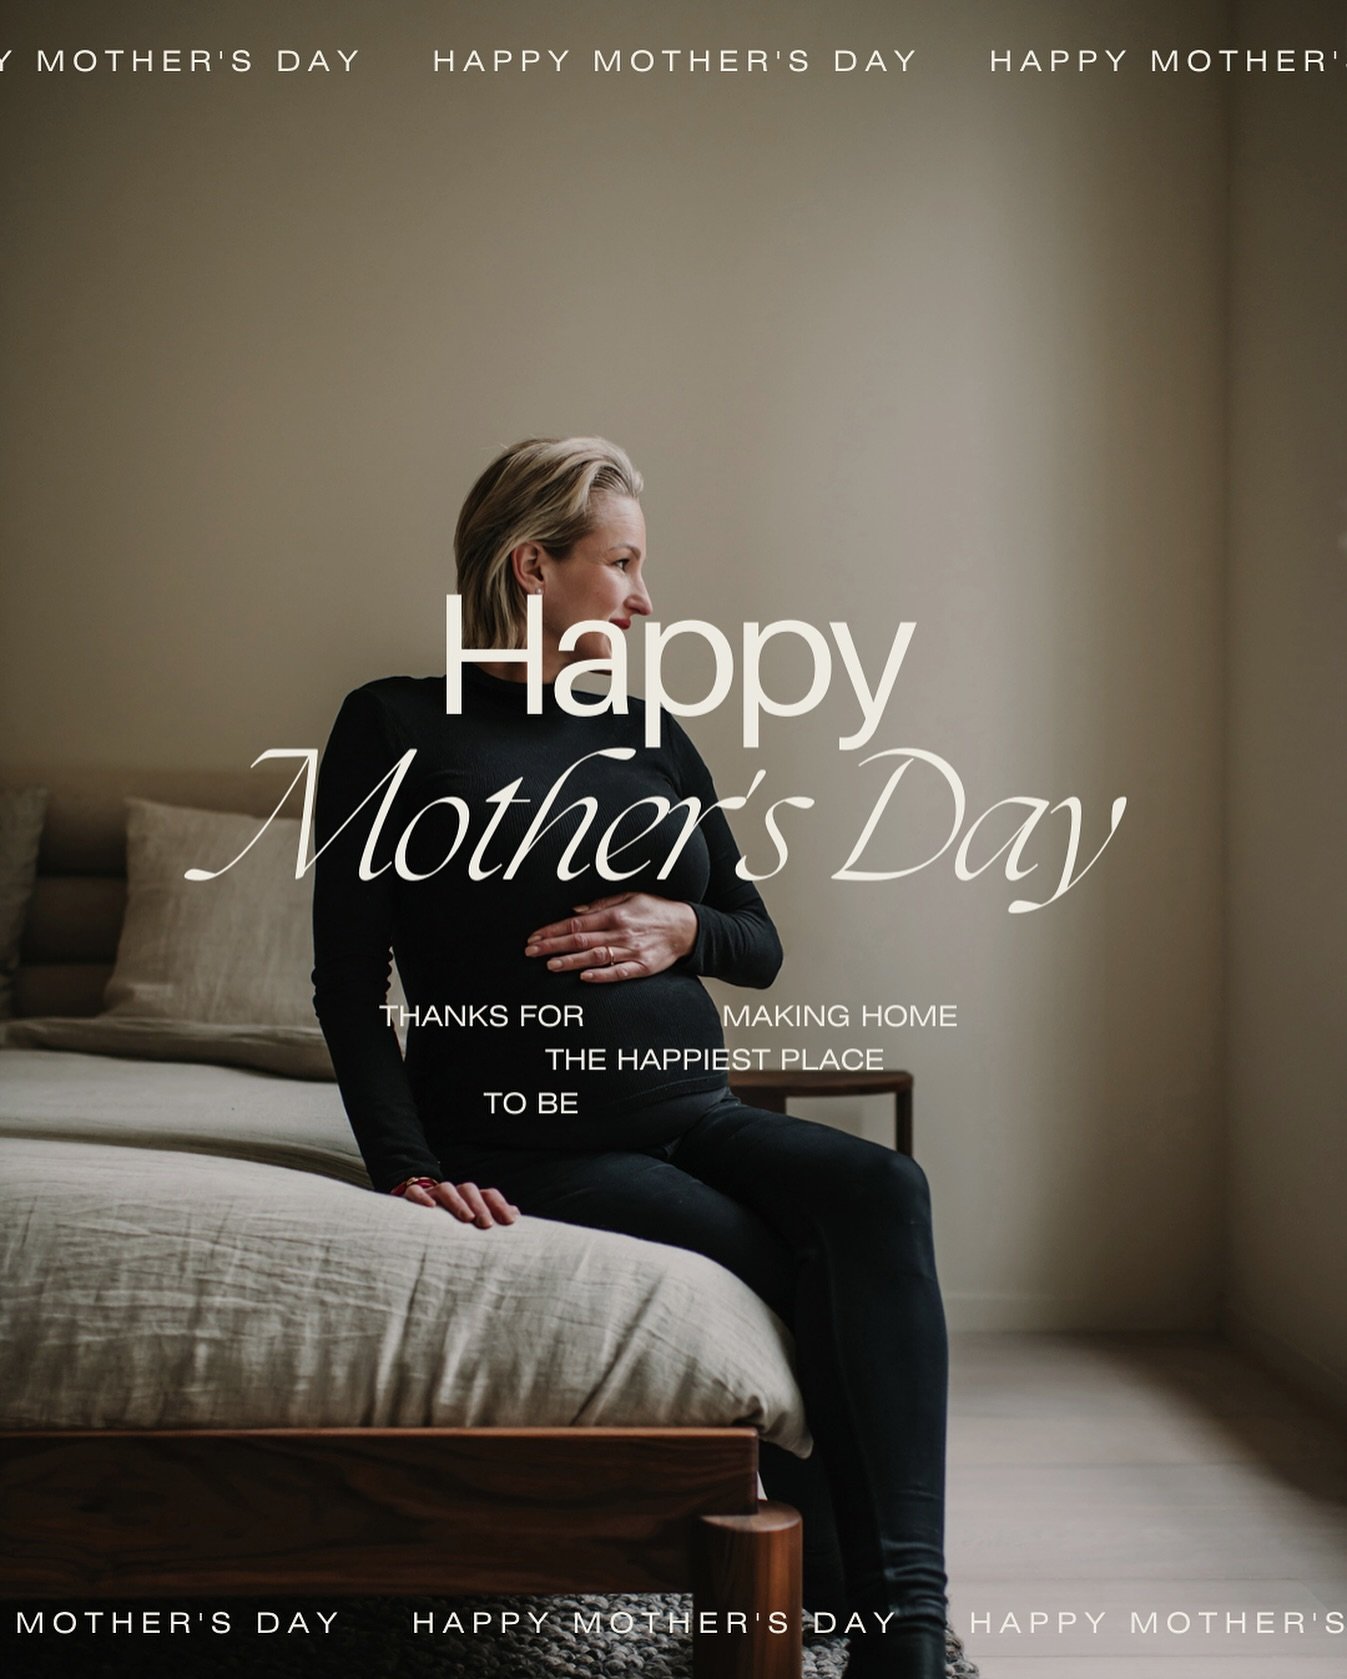 Happy Mother&rsquo;s Day from Great Expatation!

Today, we celebrate the incredible moms who make the world feel like home, no matter where life takes us. Whether you&rsquo;re a new mom navigating the joys and challenges of motherhood abroad, or a se